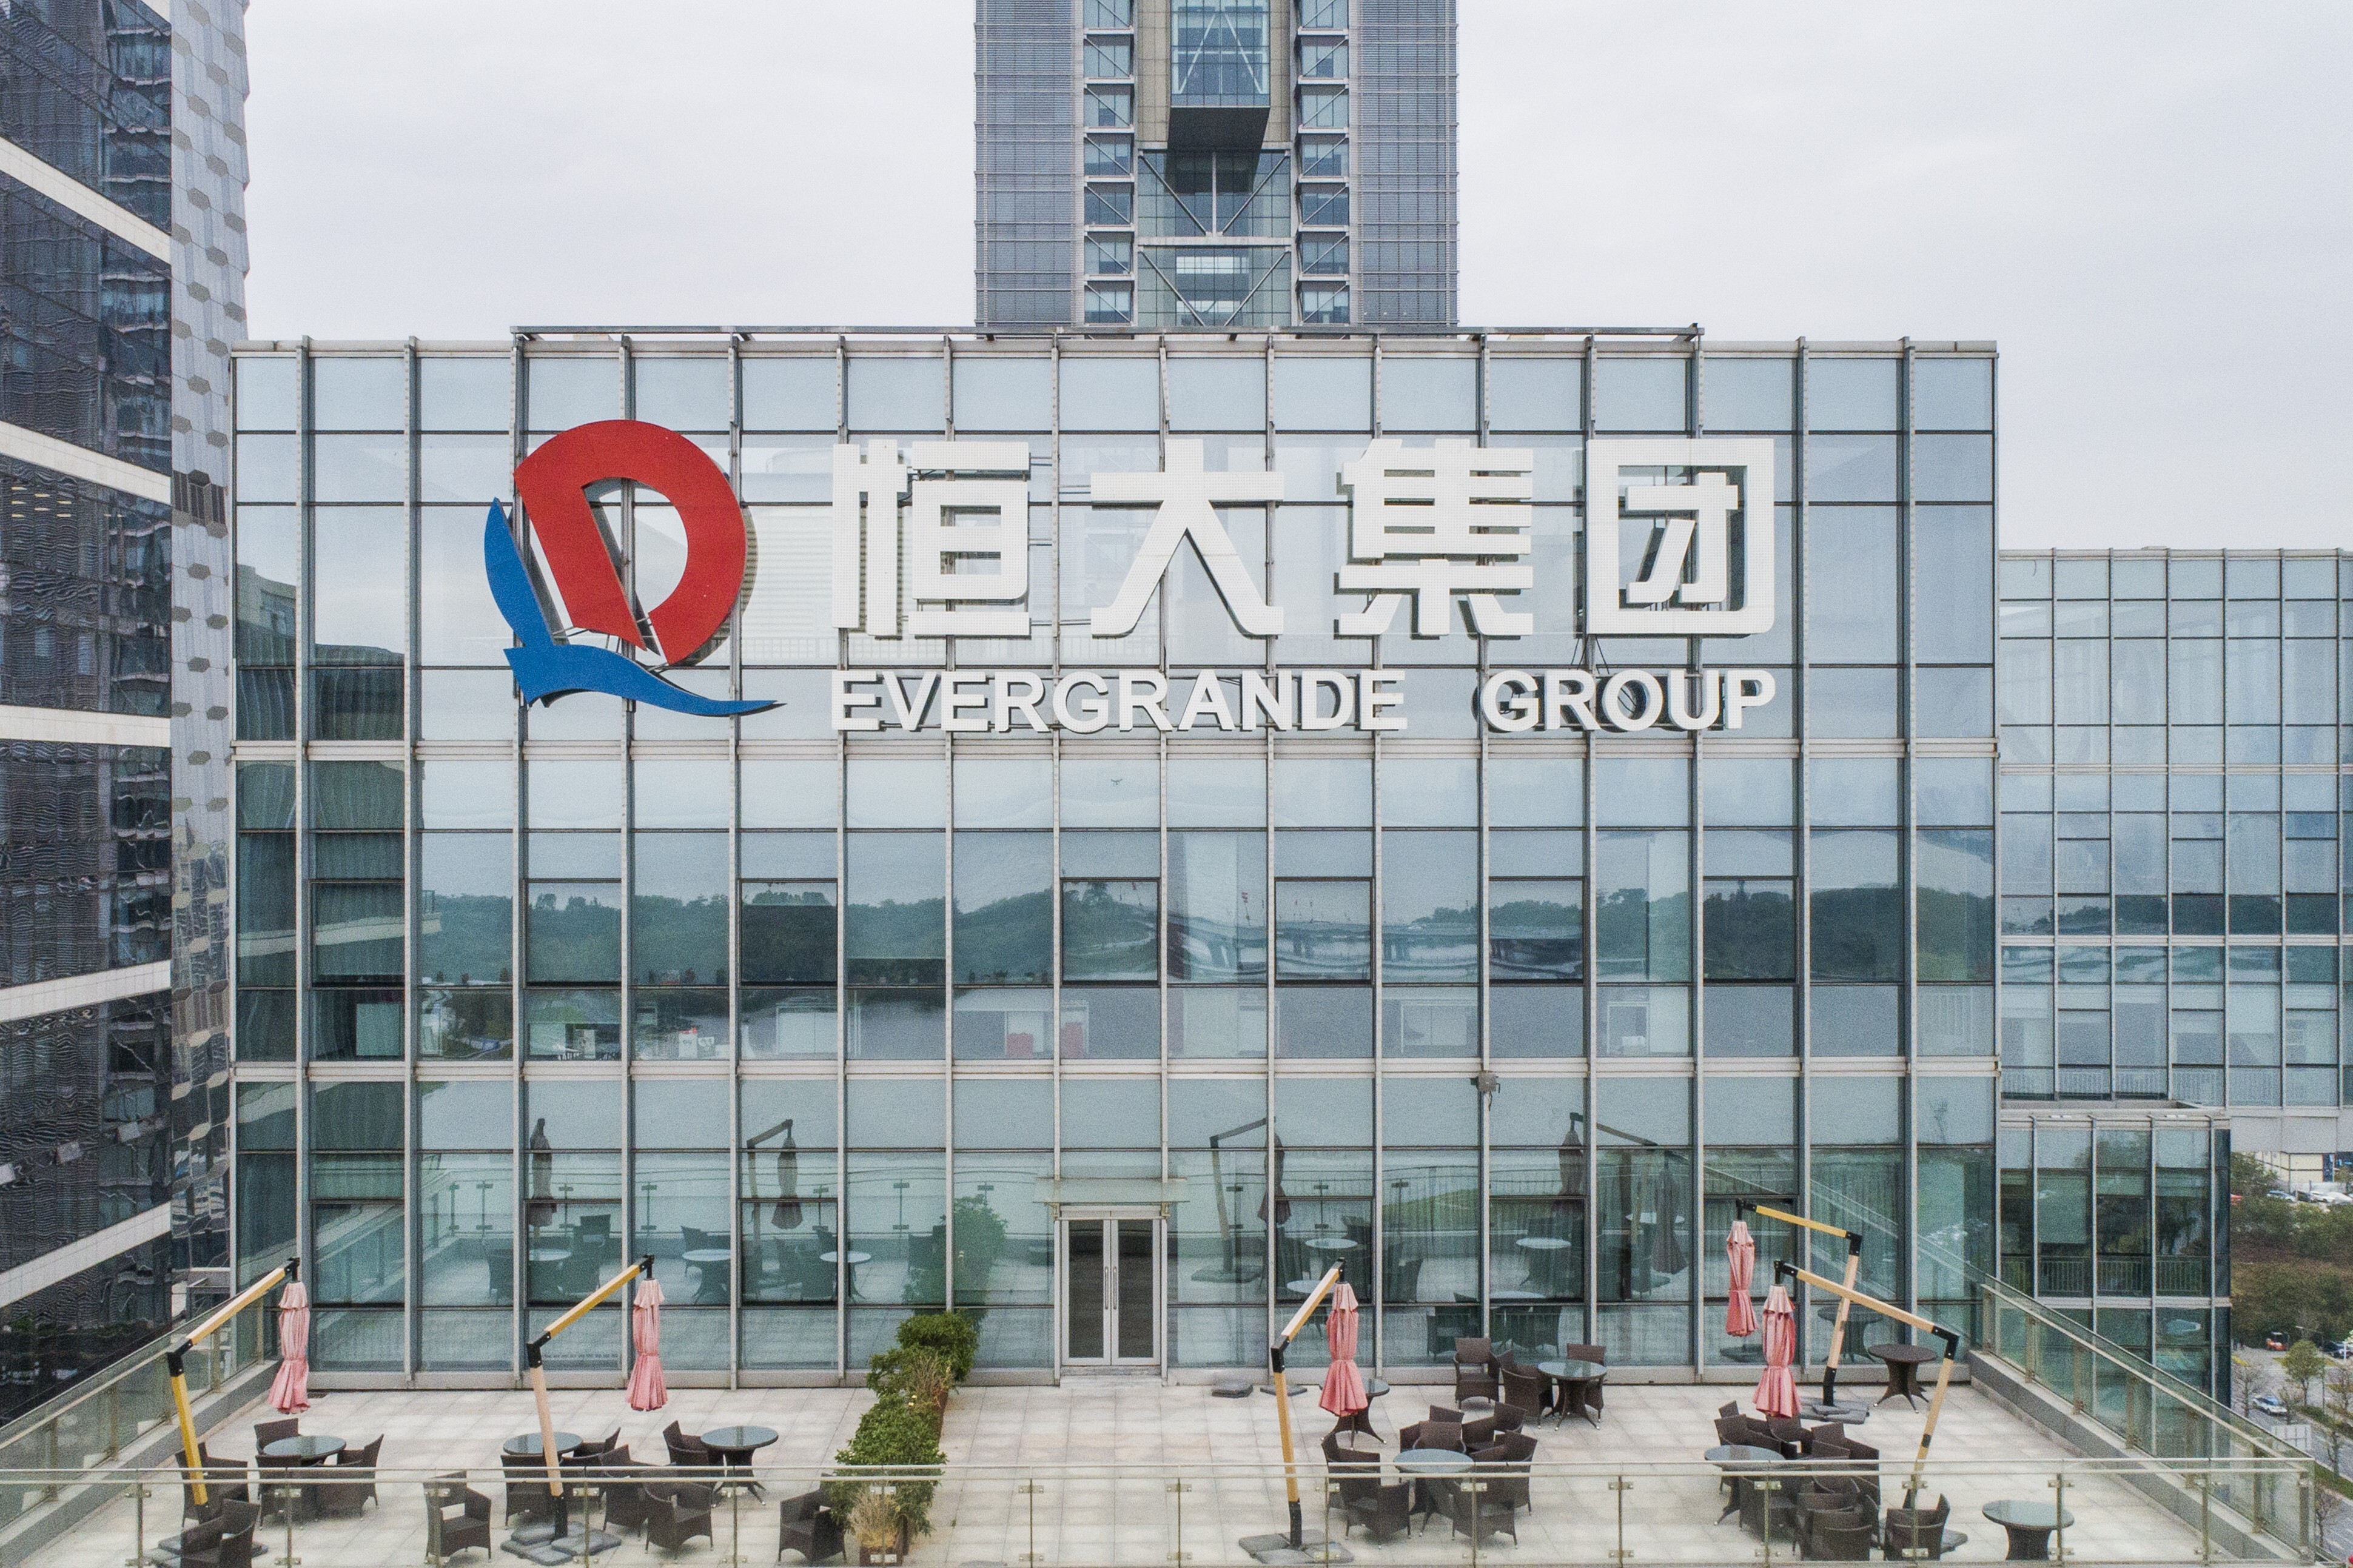 Evergrande’s headquarters in Shenzhen was besieged by retail investors earlier this month. The group’s debt crisis continues to sway market sentiment amid official silence. Photo: Getty Images